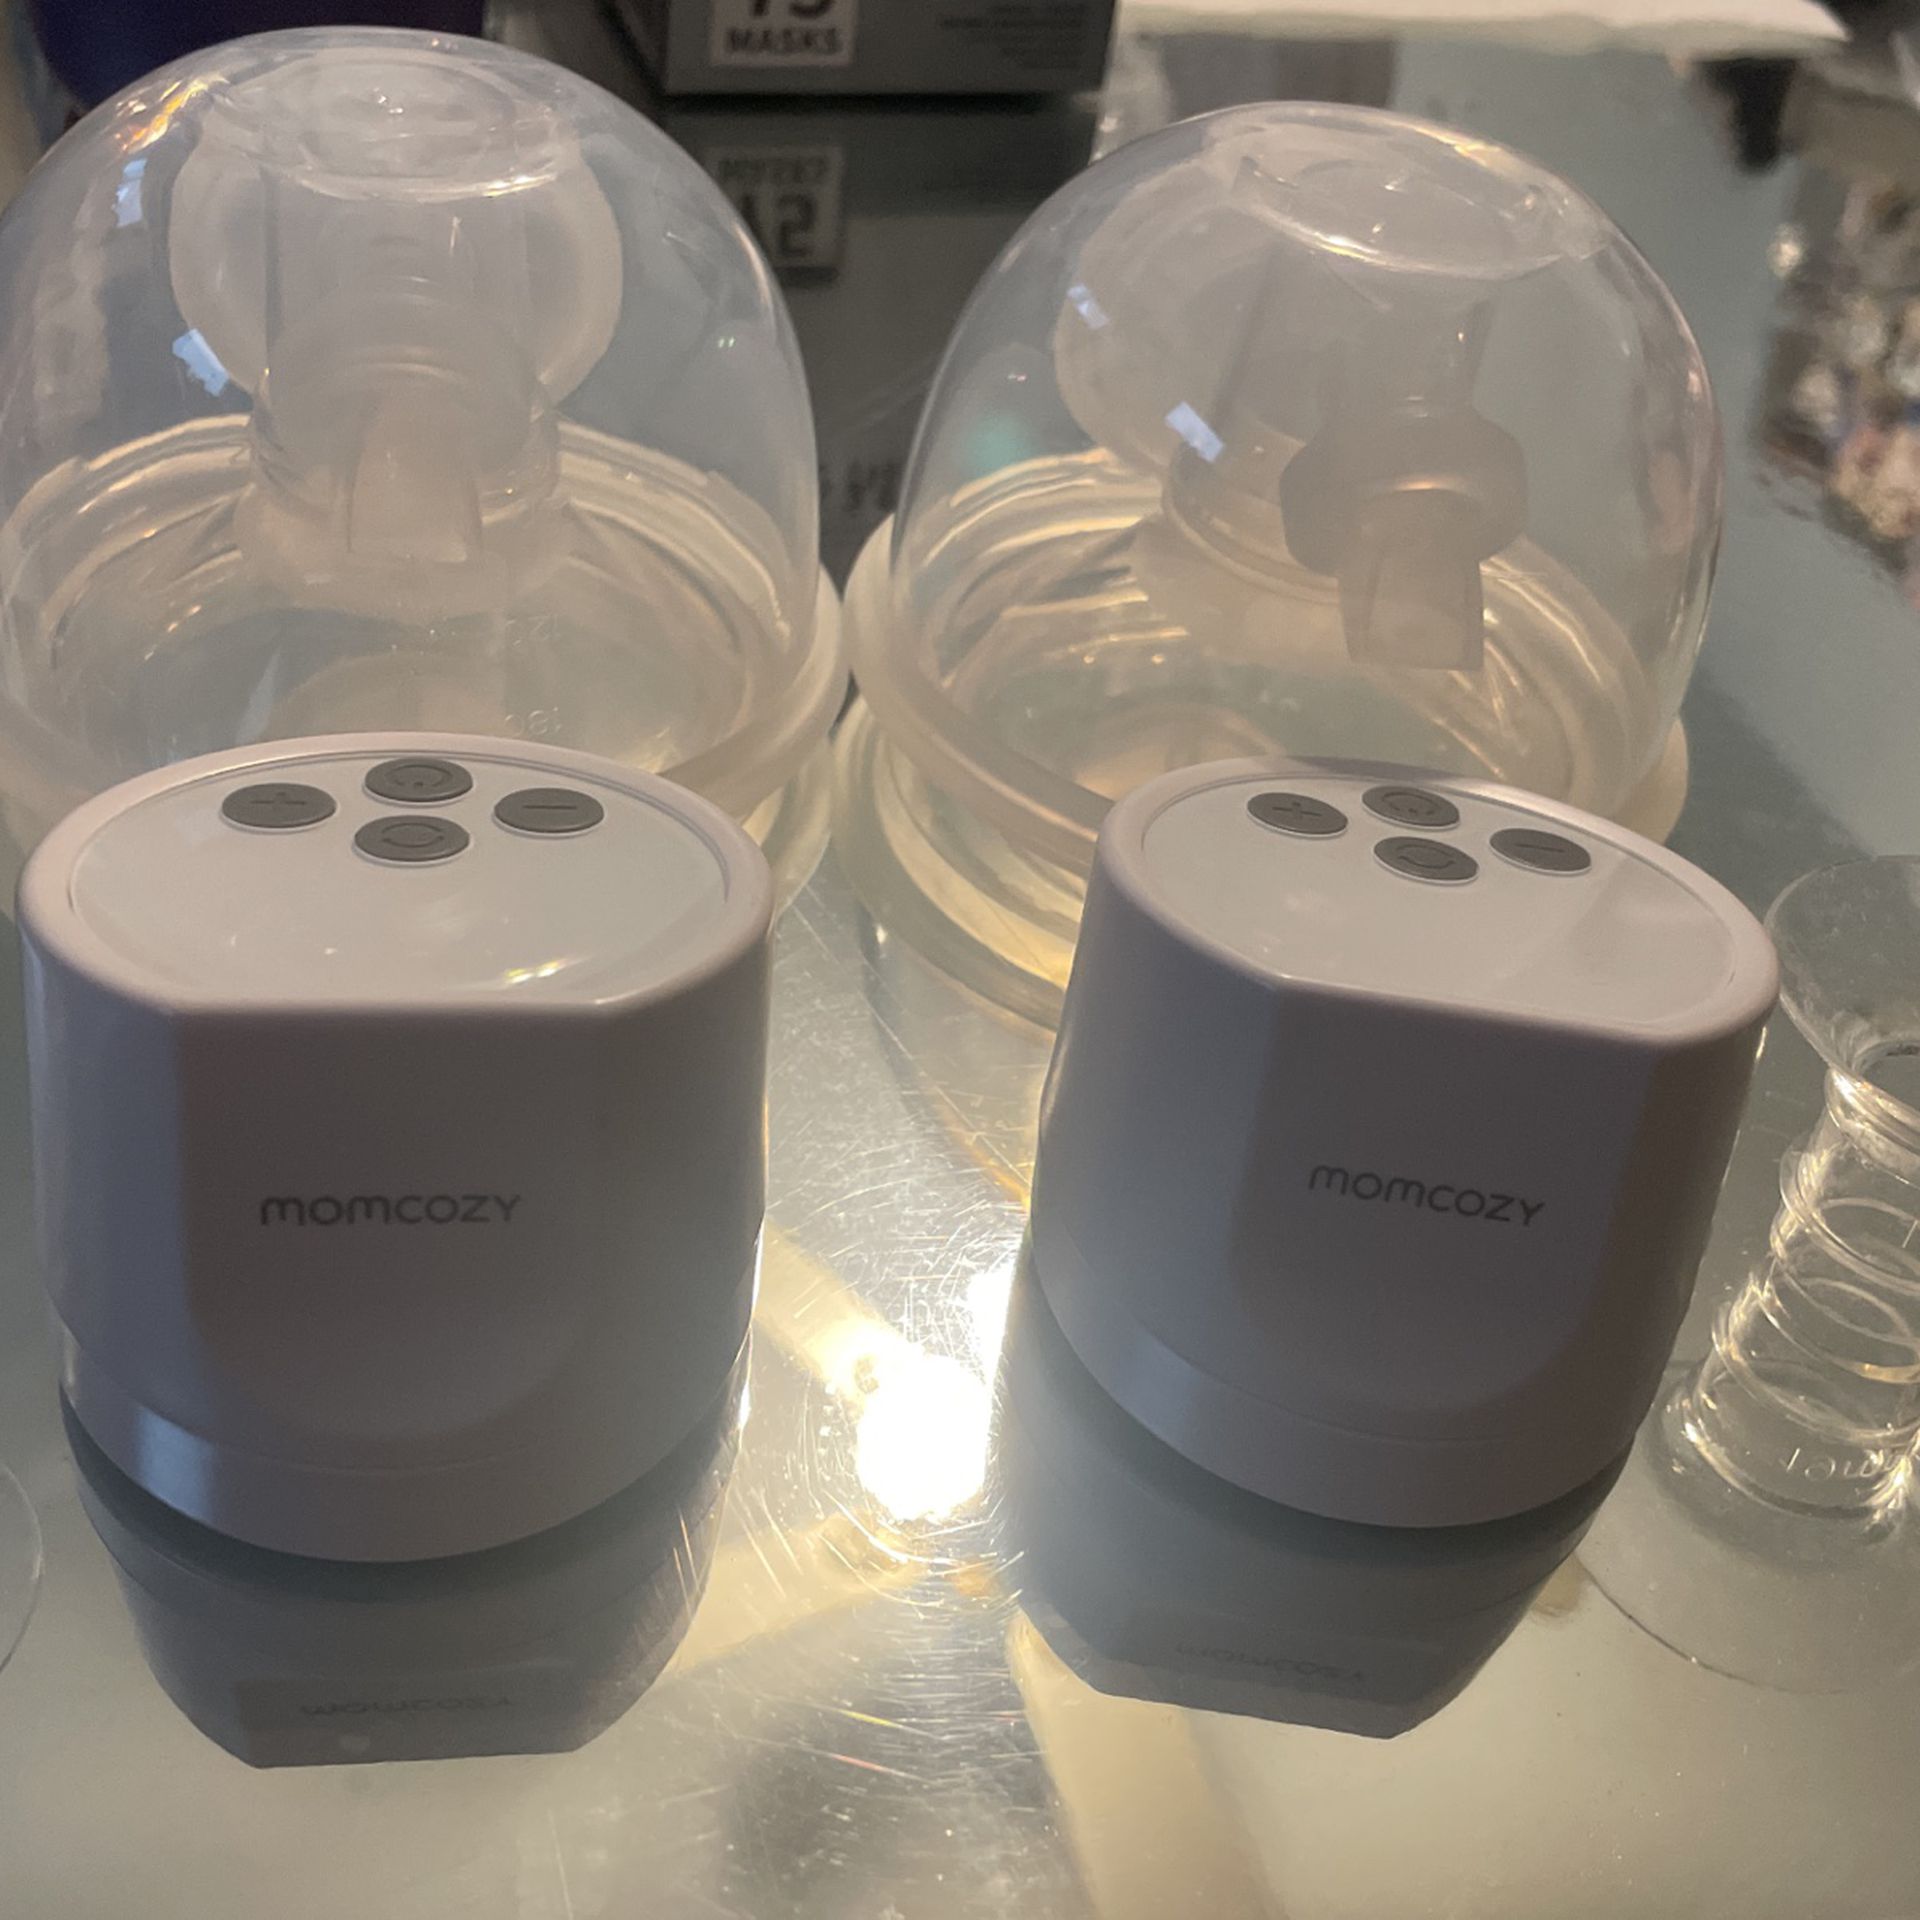 Momcozy S12 Wearable Breast Pump for Sale in The Bronx, NY - OfferUp